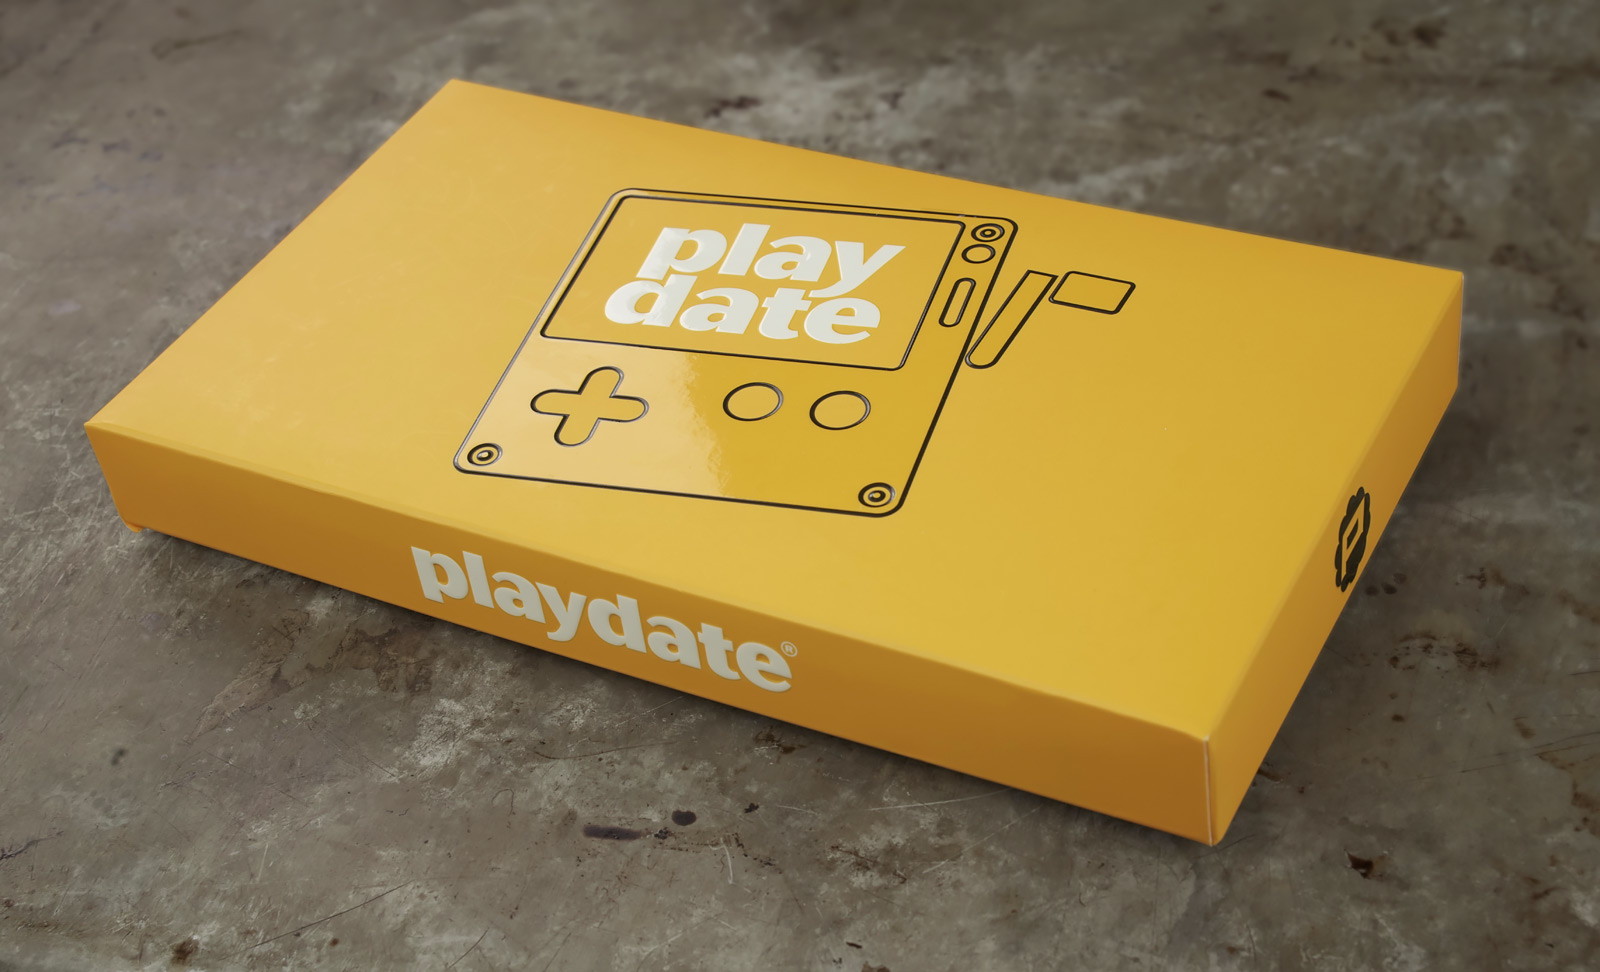 The packaging for Playdate